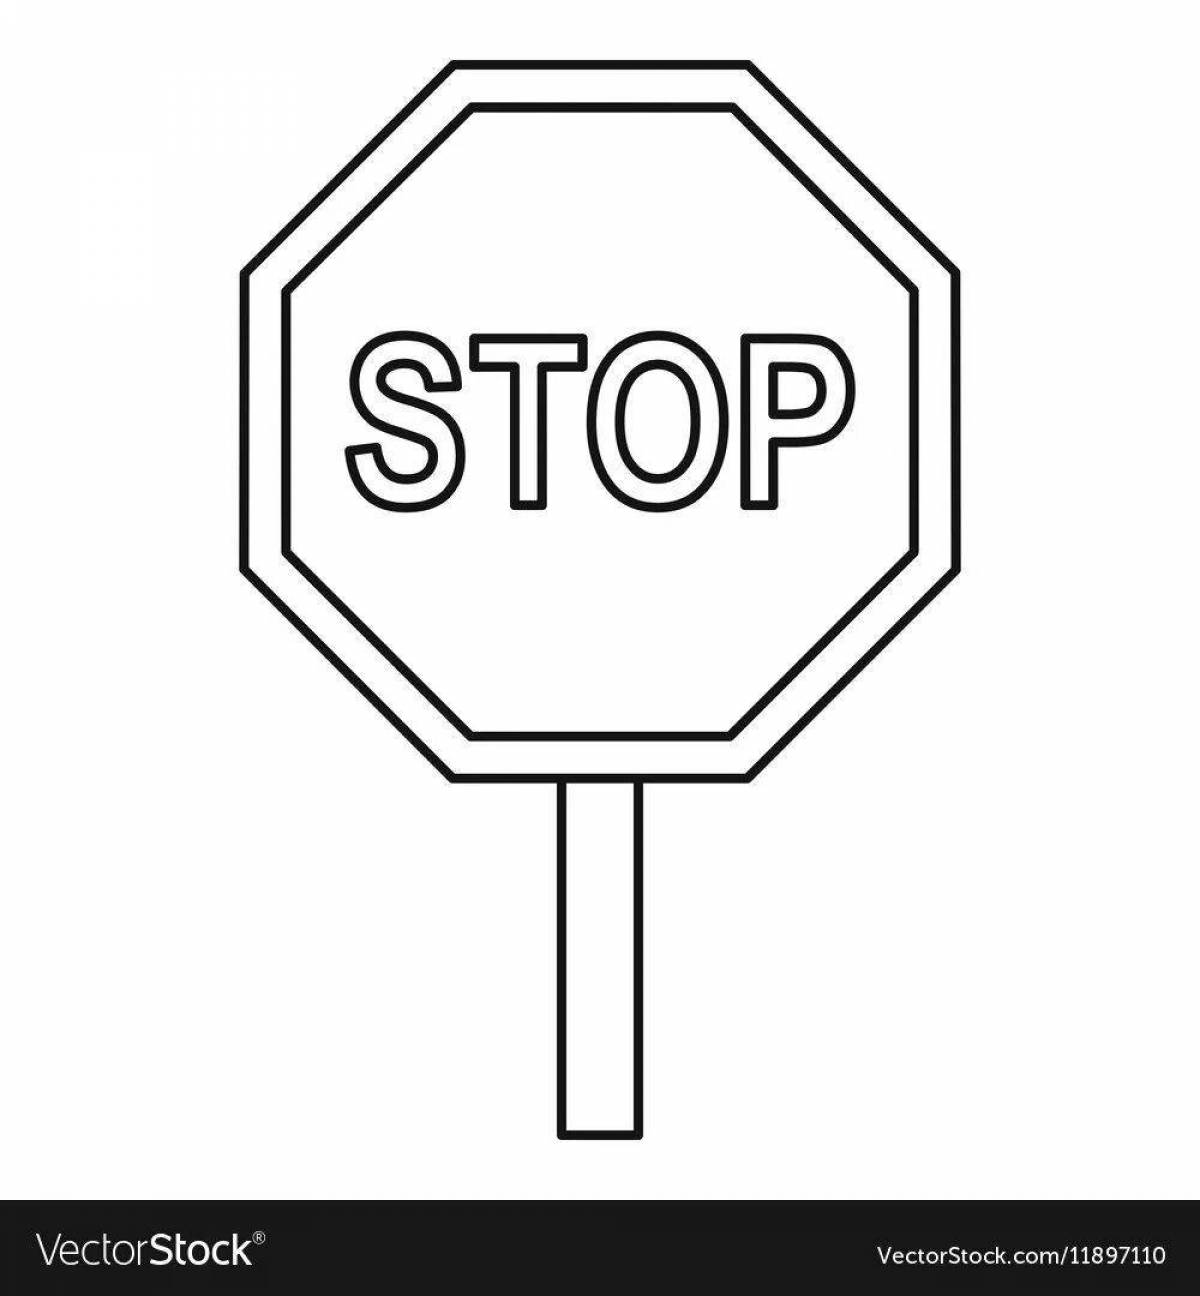 Coloring page bright stop sign